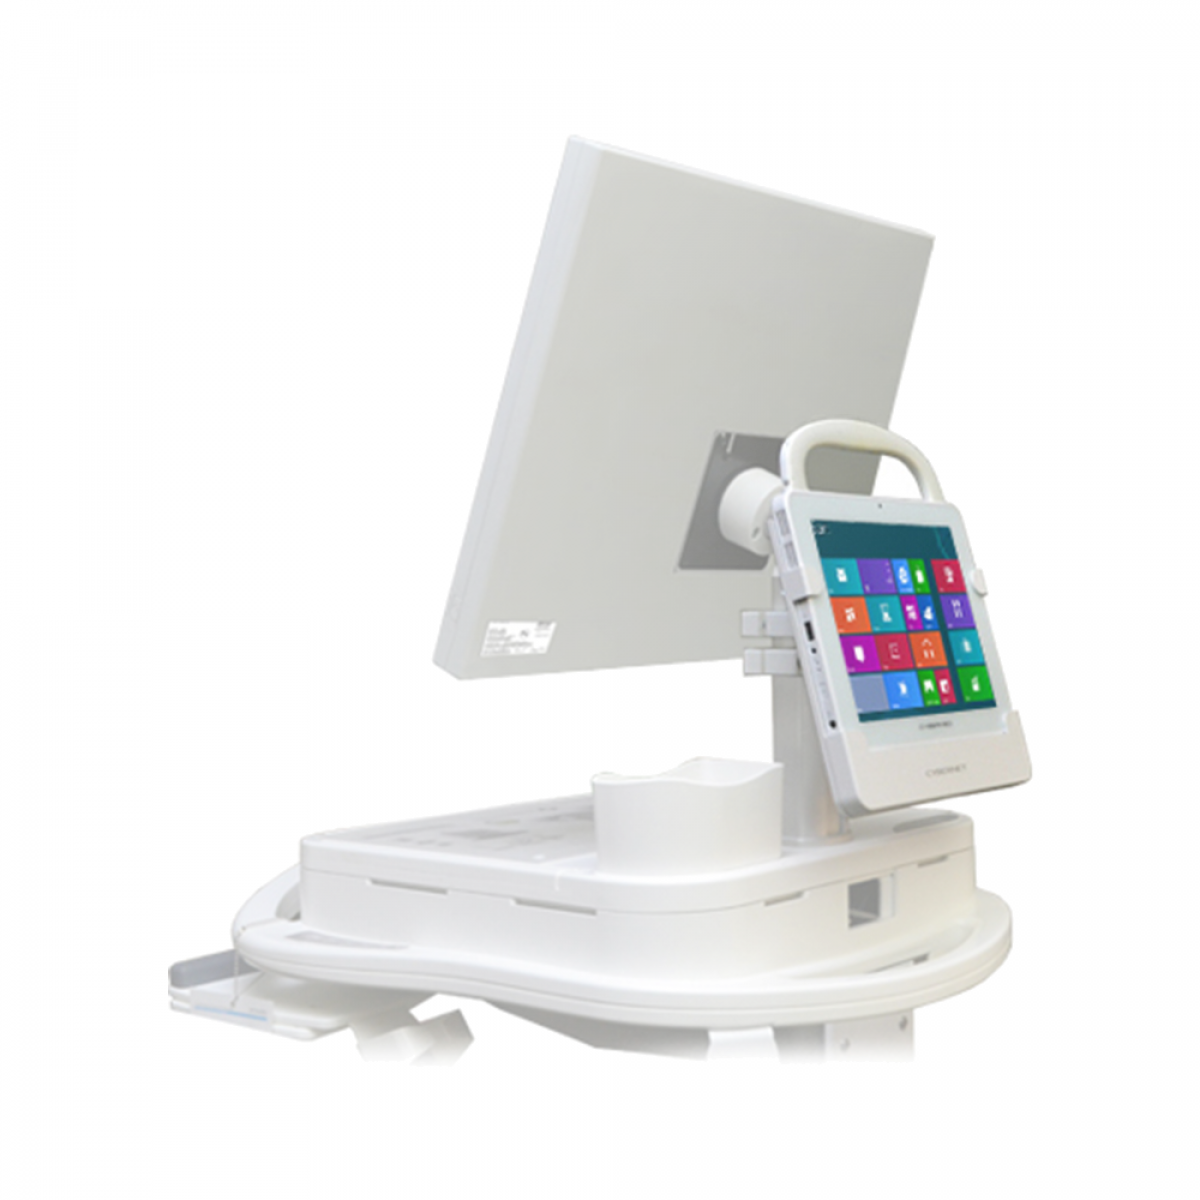 CyberMed T10C healthcare tablet on medical cart